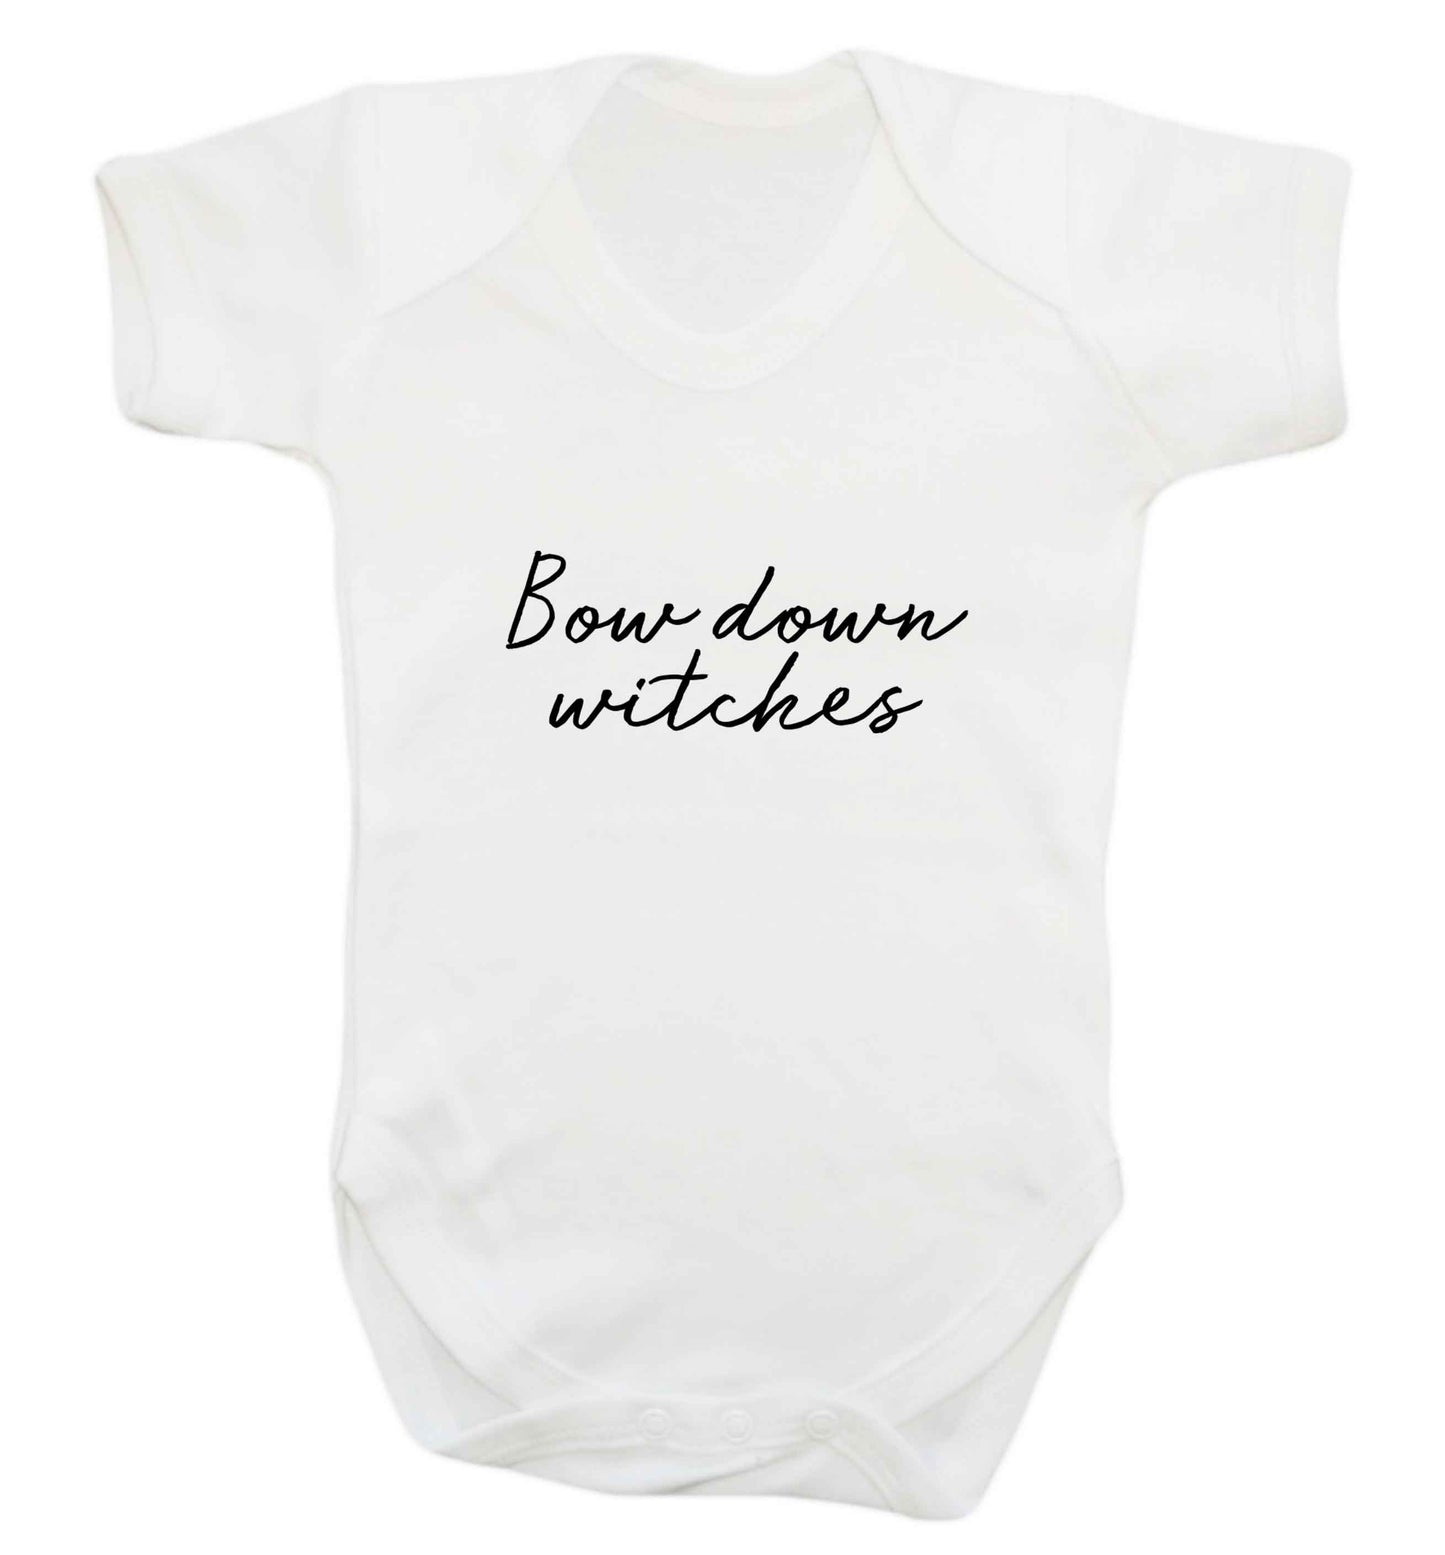 Bow down witches baby vest white 18-24 months